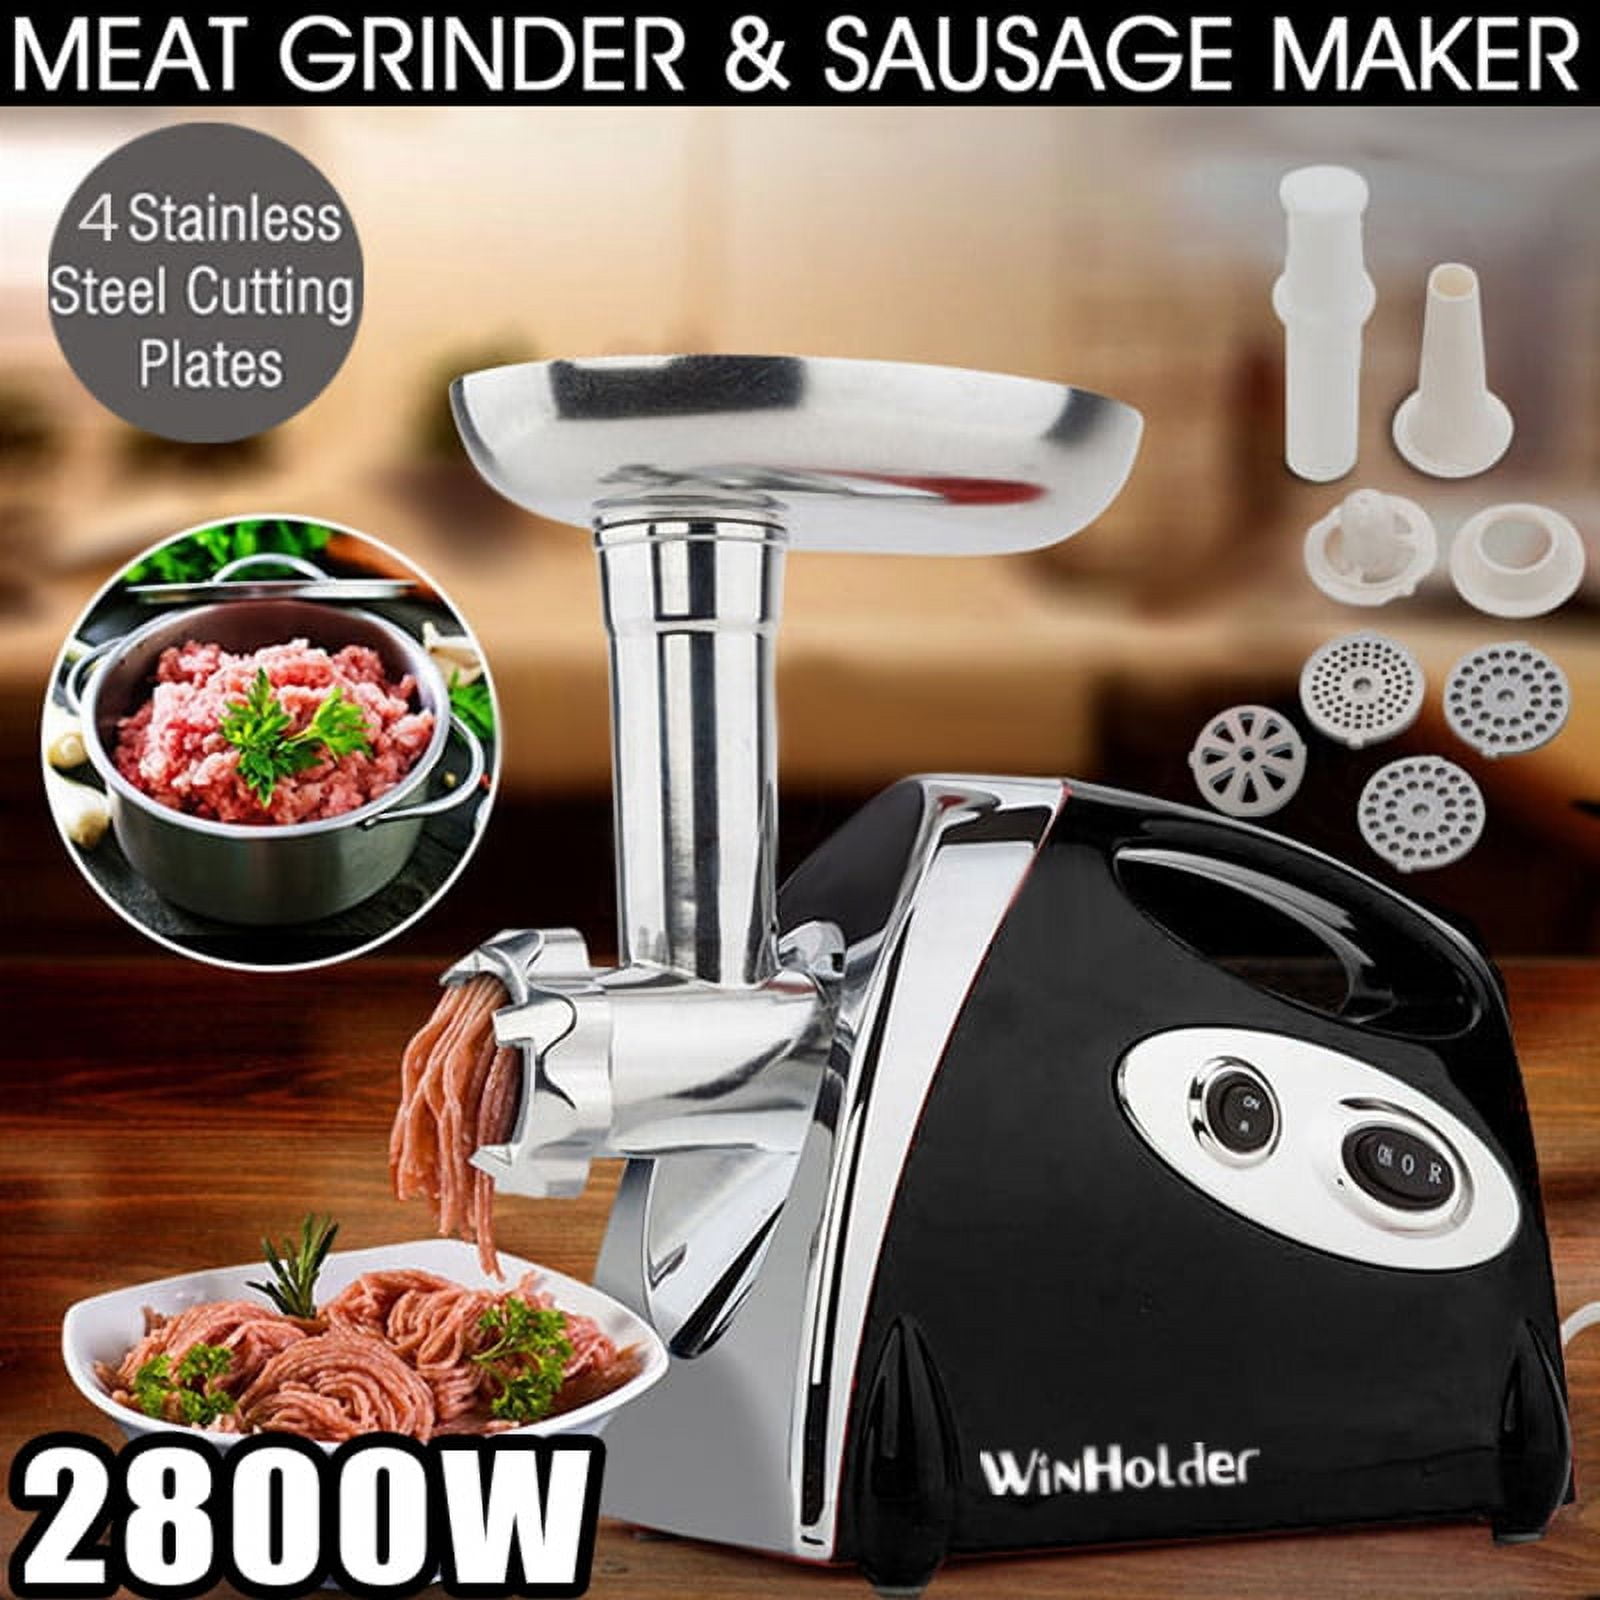 Loygkgas New 700W Electric Vegetable Food Chopper Cutter Meat Grinder Mincer Machine, Size: As Shown